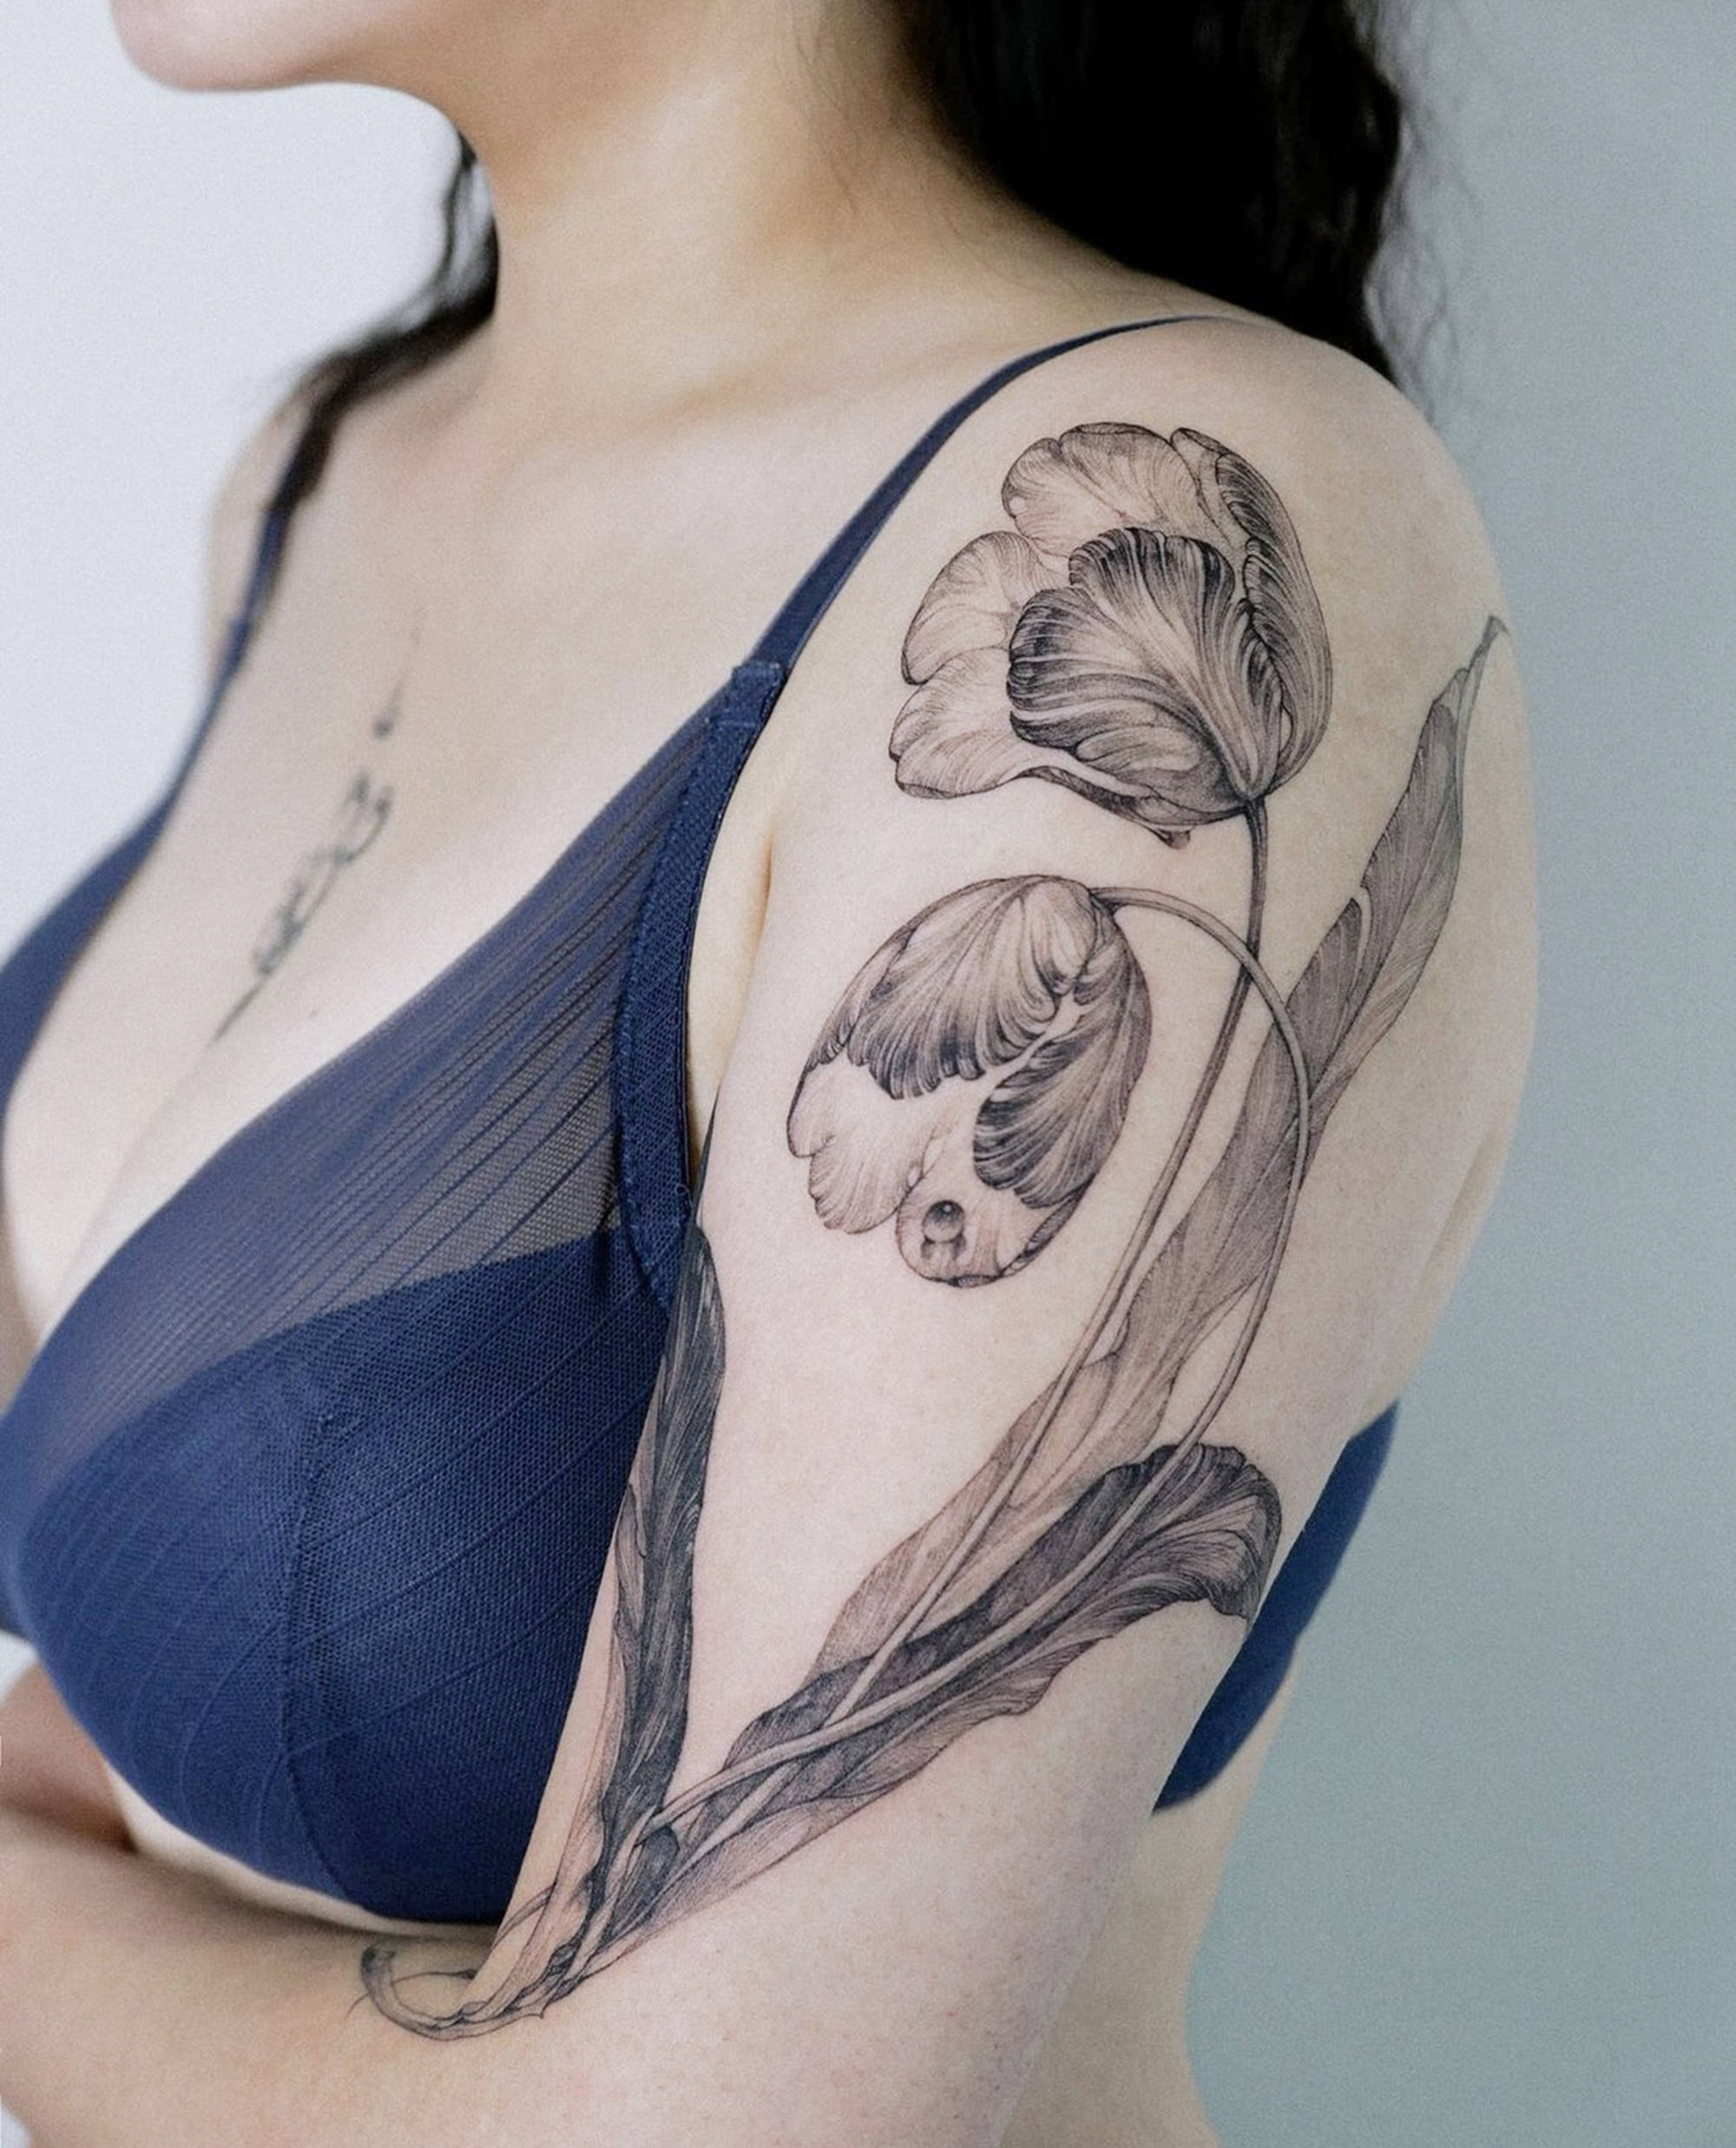 An Interview with Woohwa about her Remarkable Fine-Line Tattoos